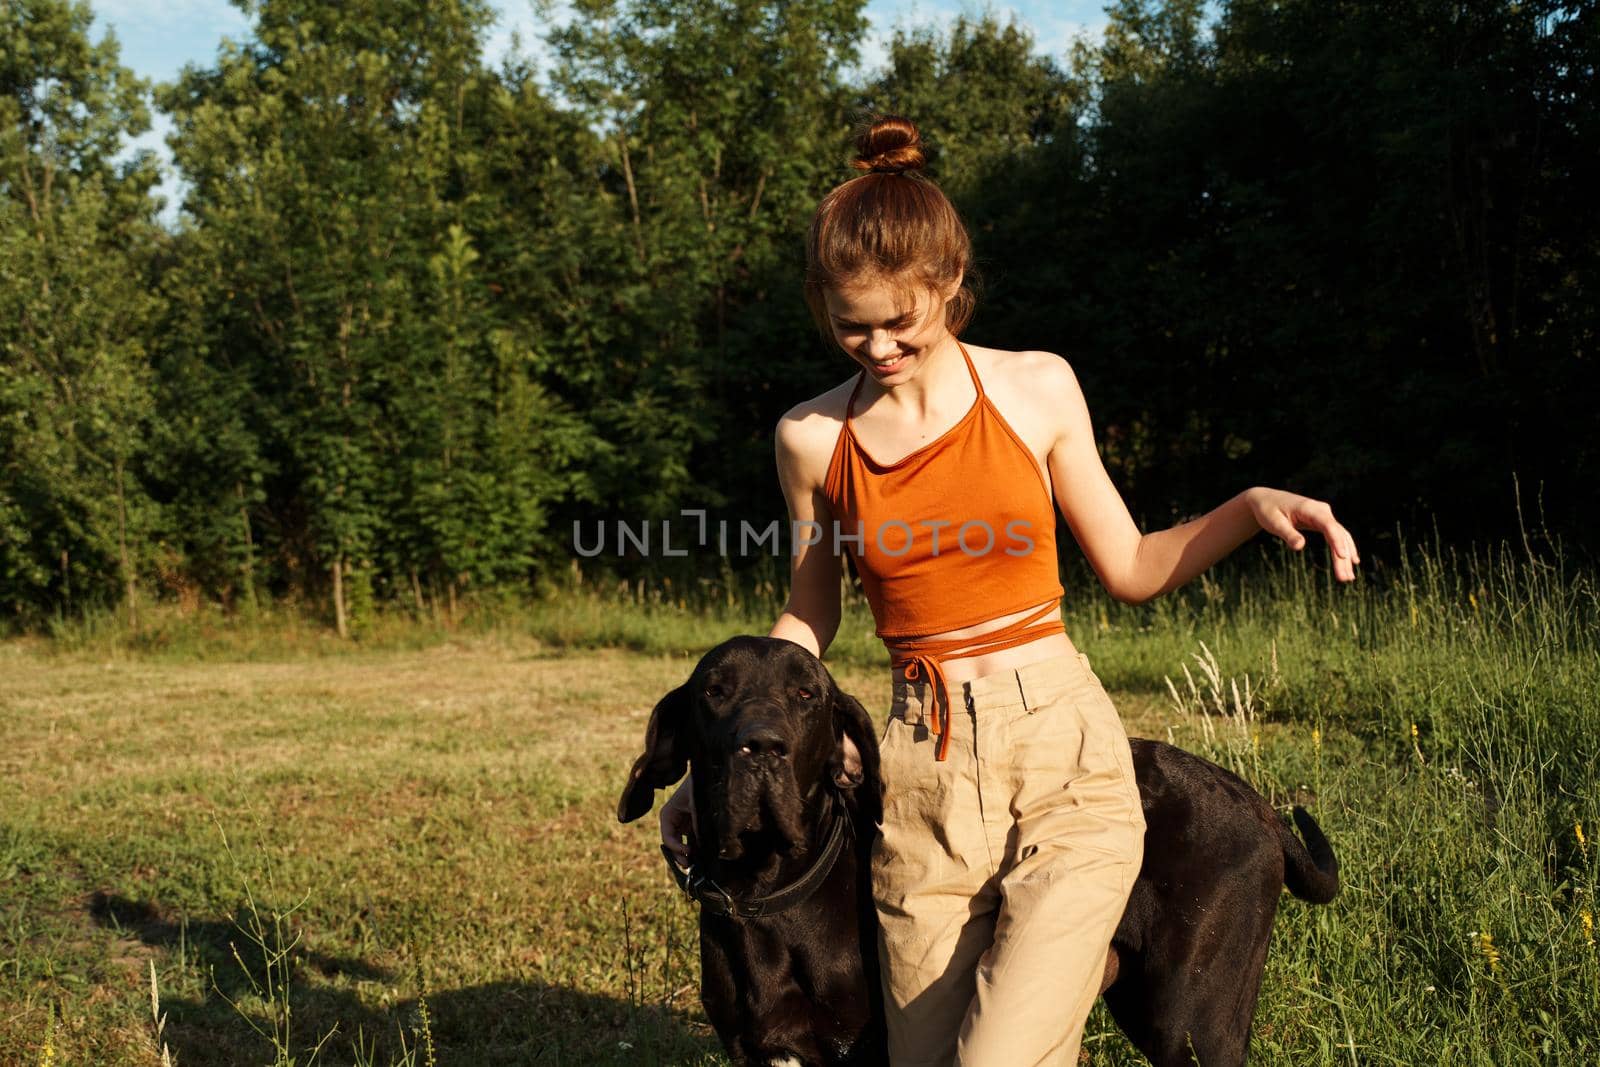 cheerful woman outdoors with dog and fun nature. High quality photo